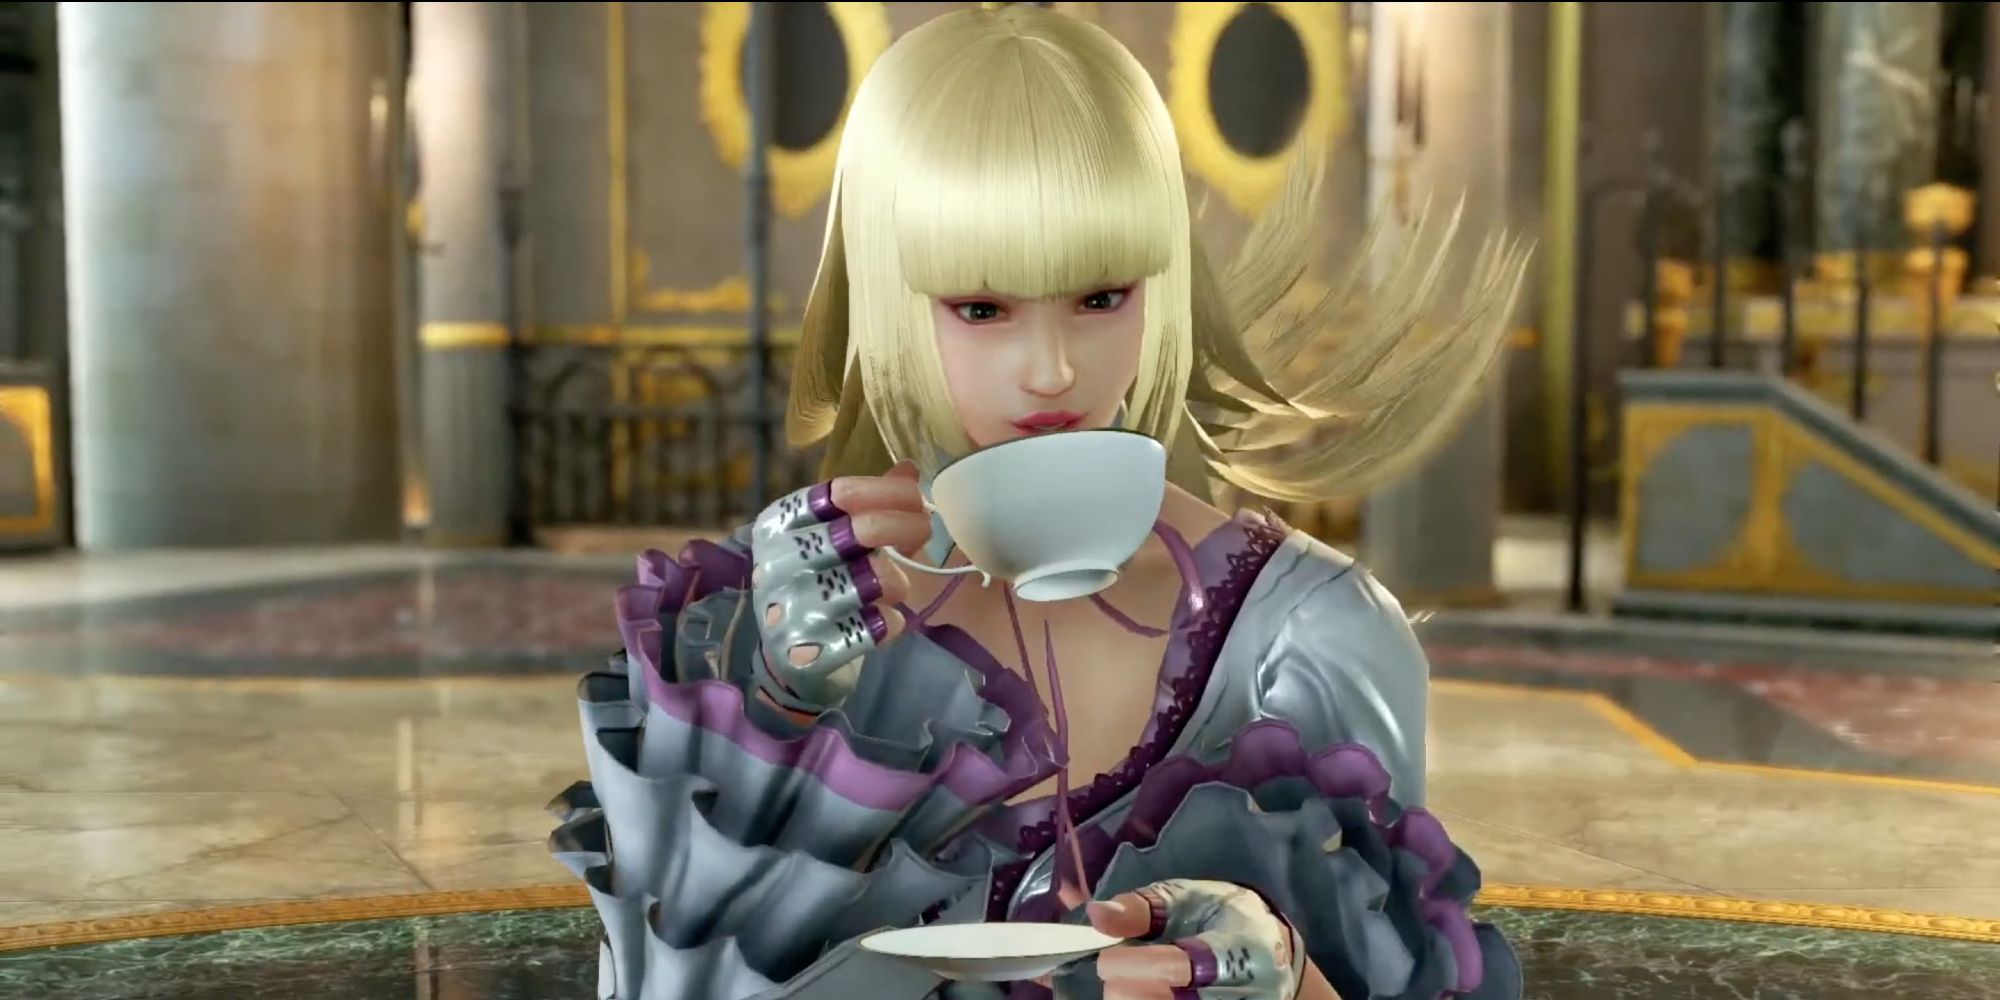 Iconic Fighting Stances in Video Games - Lili - Player enjoys a cup of tea